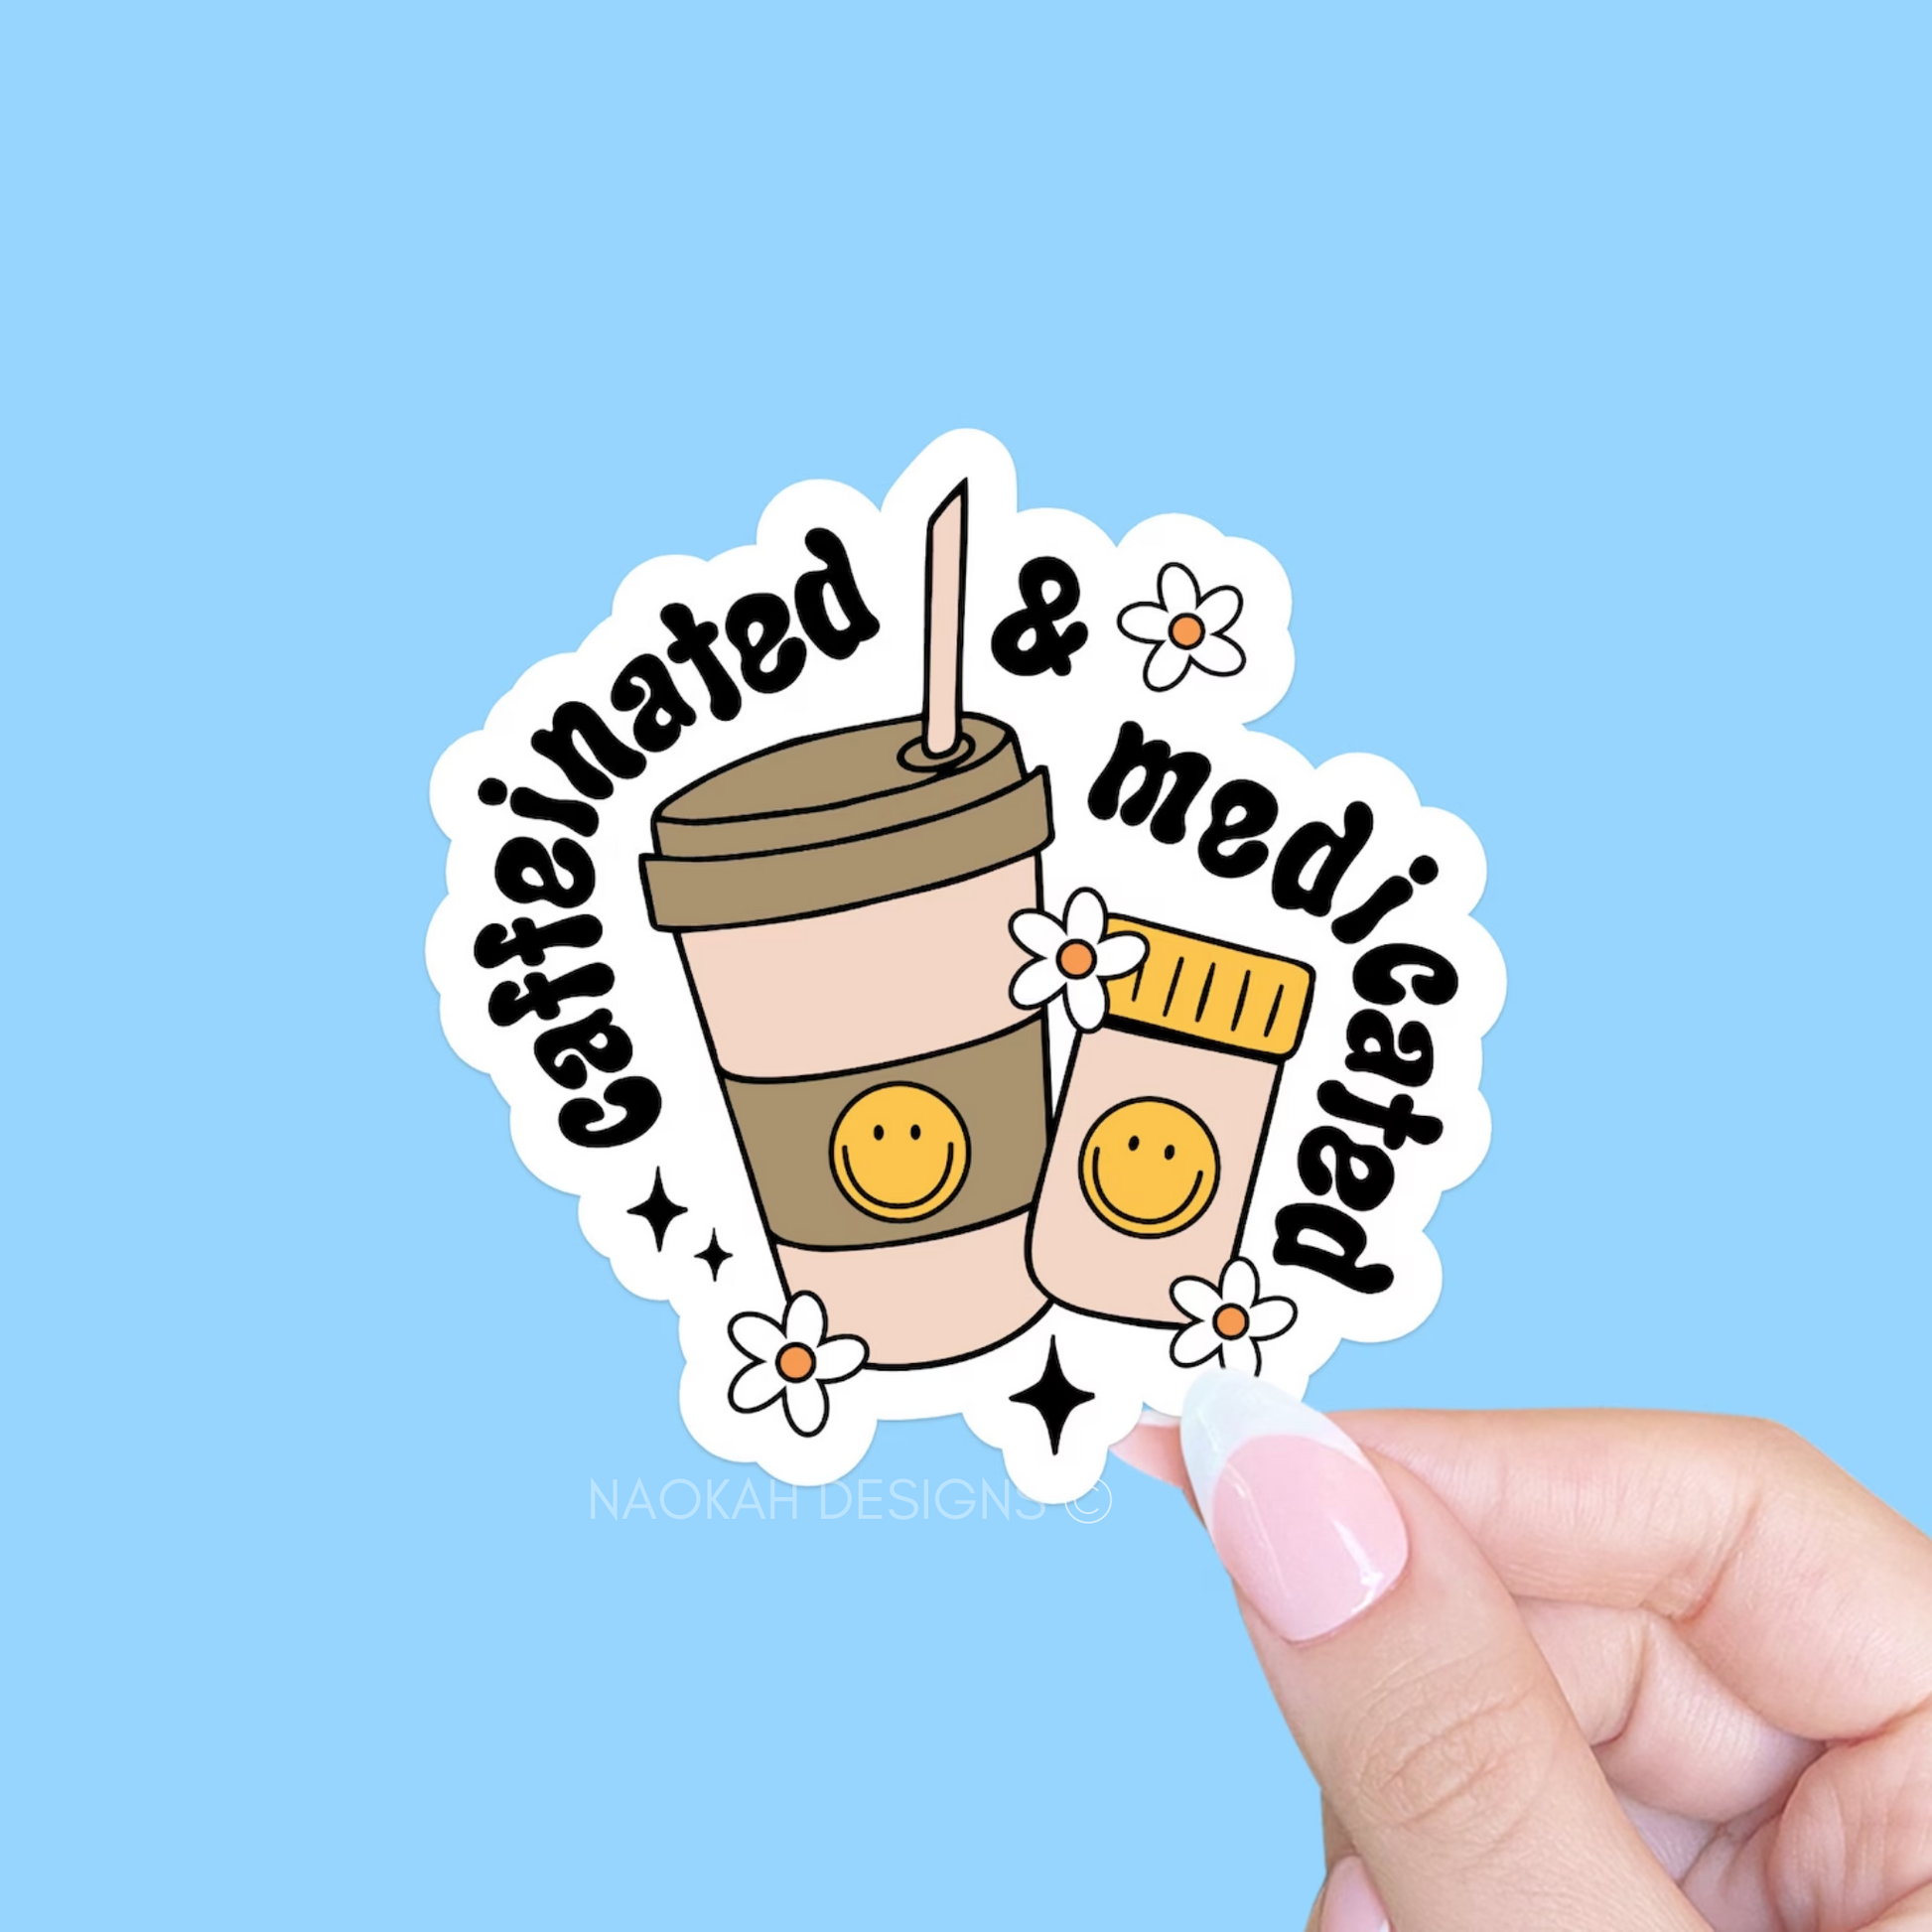 Caffeinated and Medicated Sticker, Cute Mental Health Sticker, Mental Health Sticker, Coffee Lover Sticker, Trendy Sticker, Cute Sticker